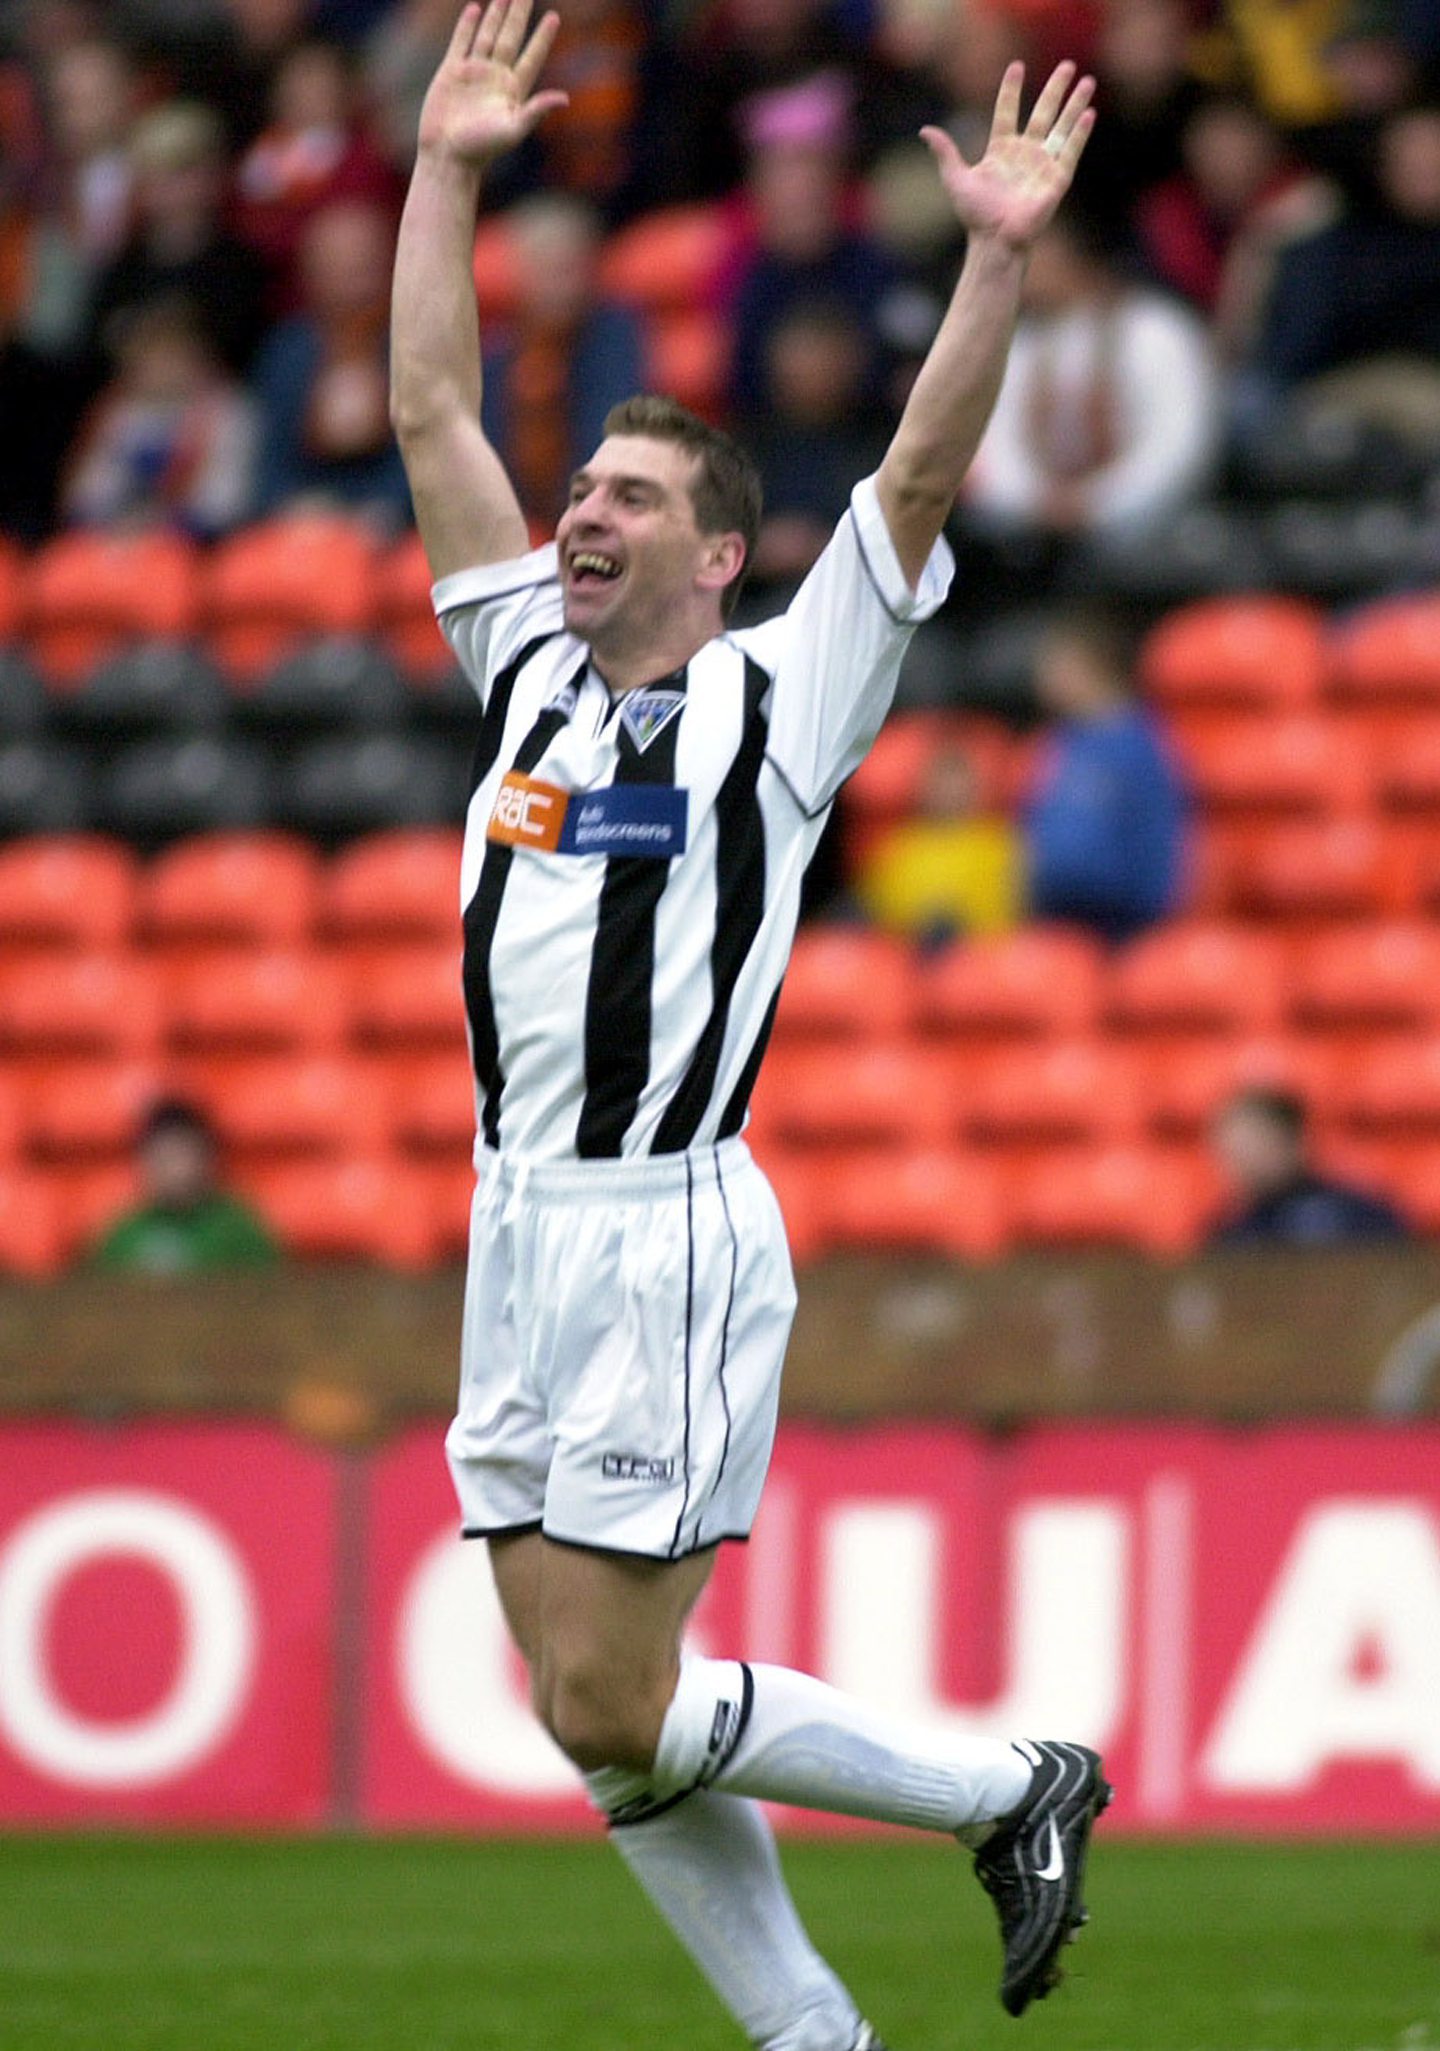 Petrie celebrates another goal for Dunfermline against United - this time in 2001.